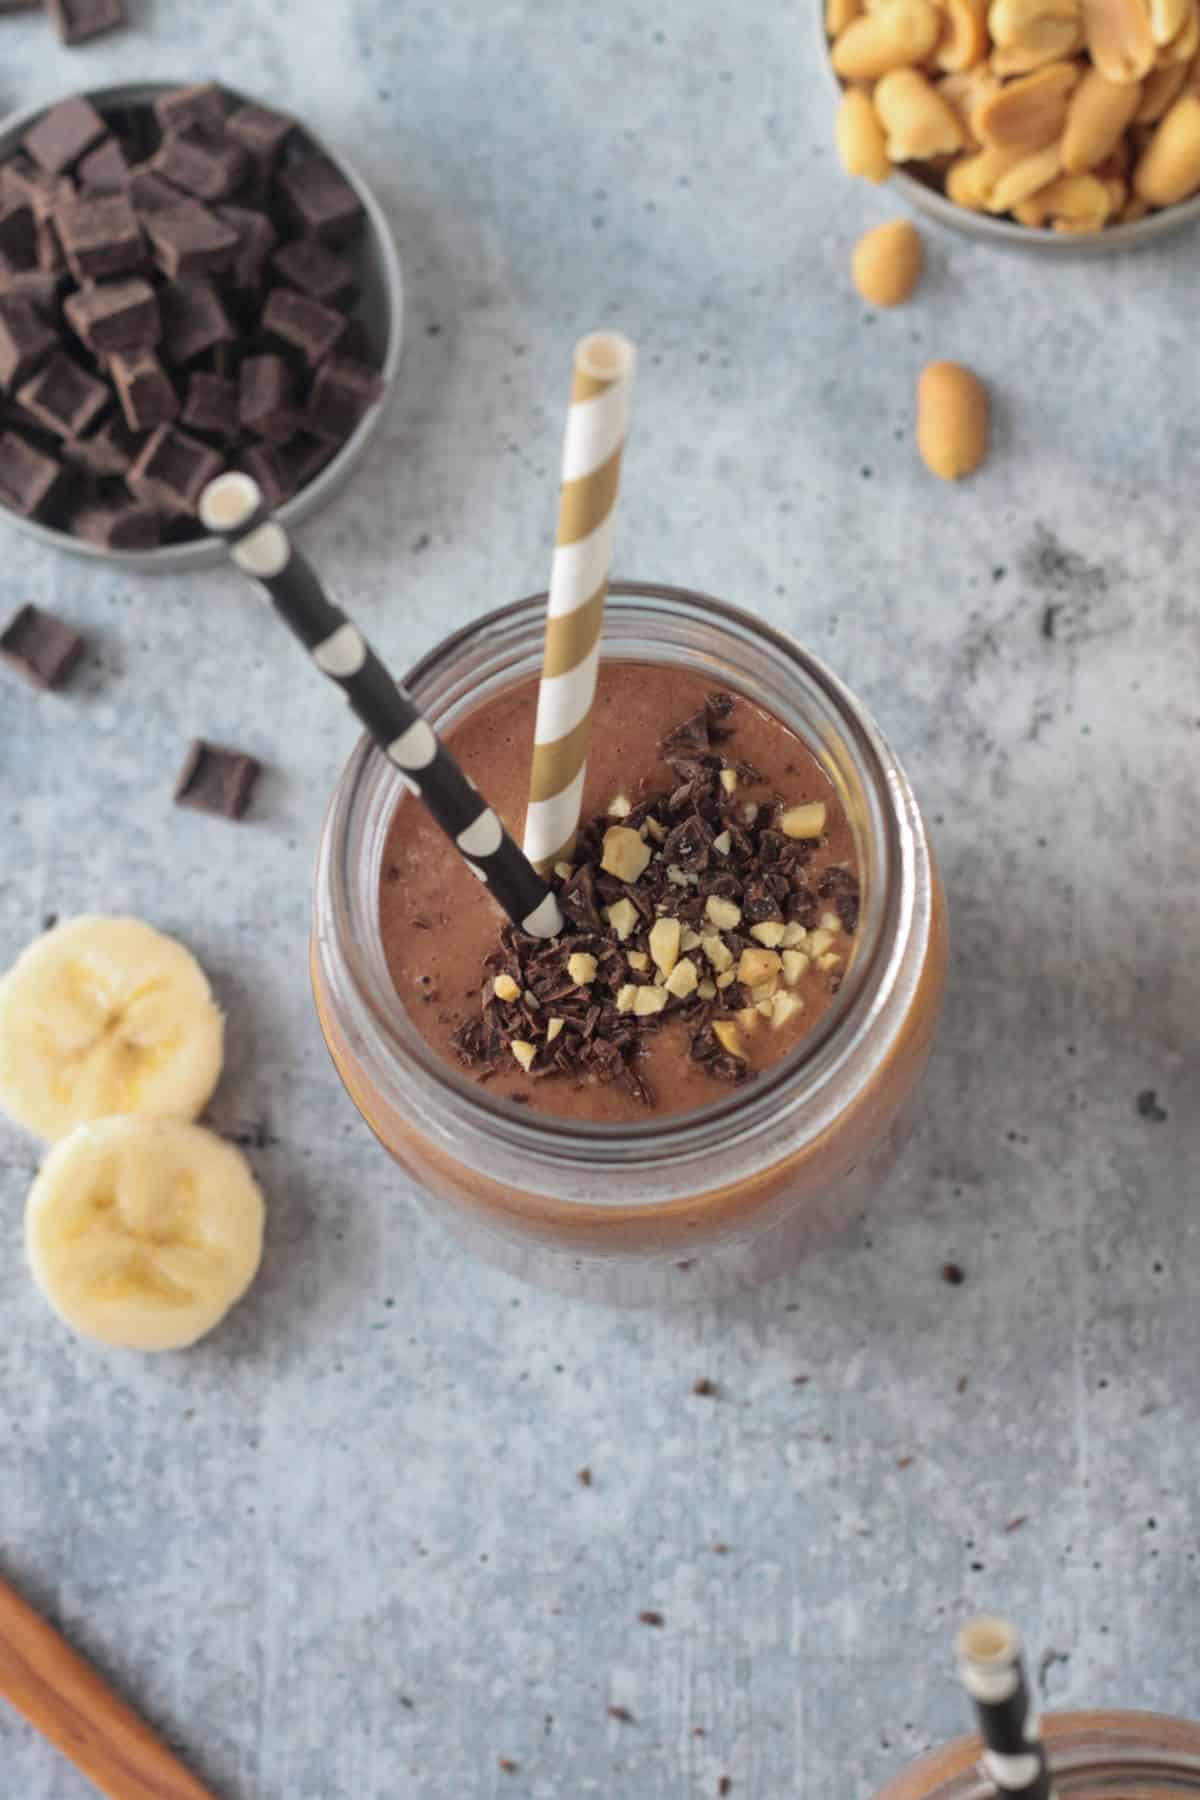 Overhead view of a peanut butter chocolate smoothie topped with chocolate chips and crushed peanuts.